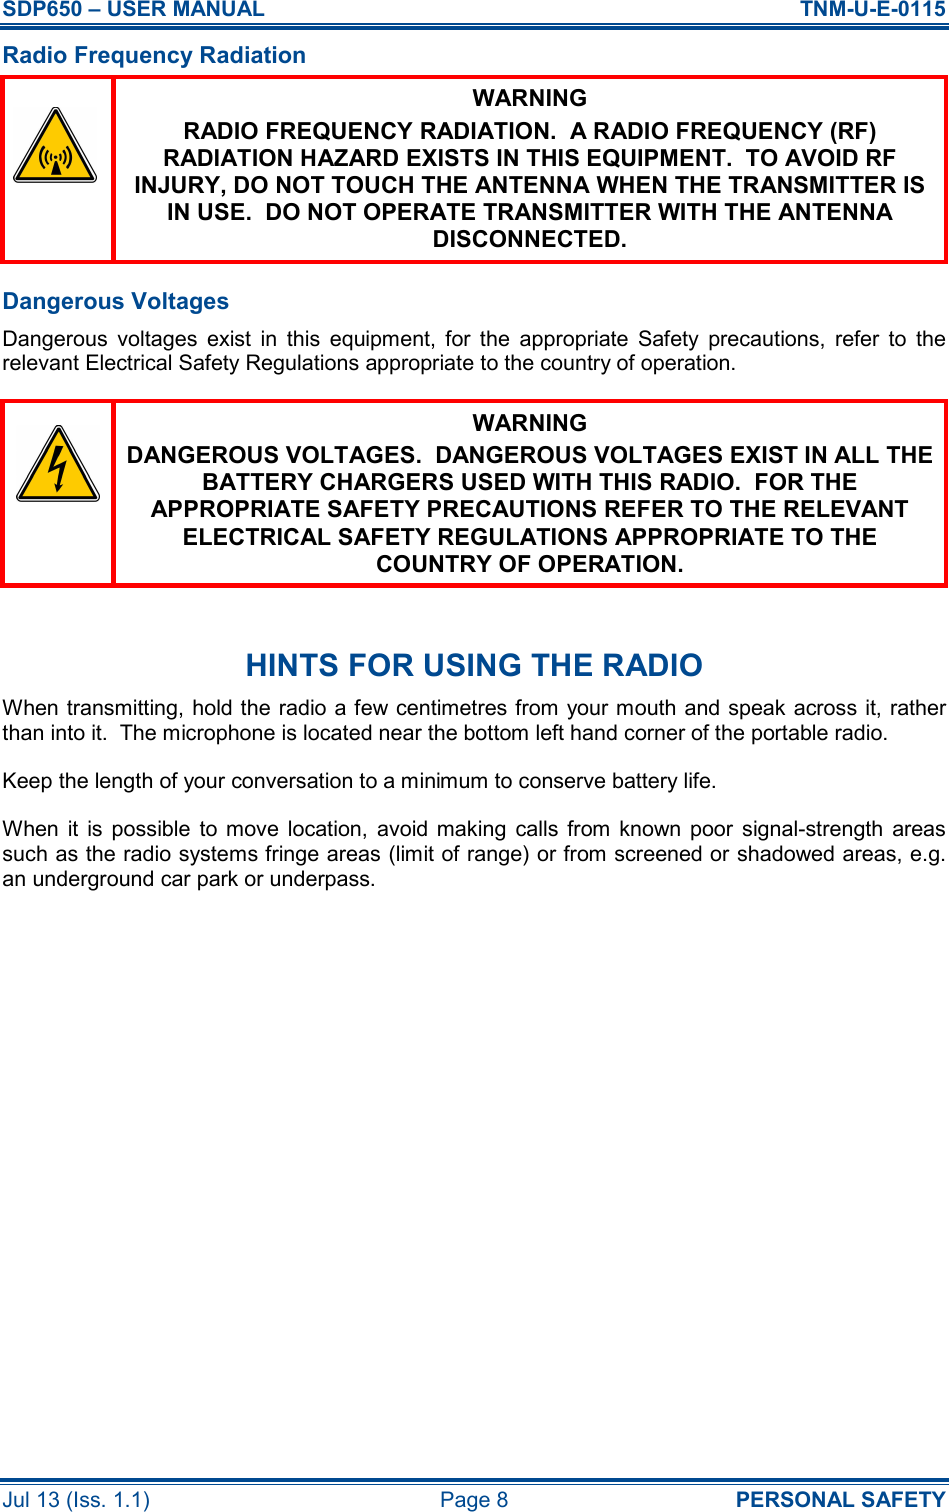 SDP650 – USER MANUAL  TNM-U-E-0115 Jul 13 (Iss. 1.1)  Page 8  PERSONAL SAFETY Radio Frequency Radiation  WARNING RADIO FREQUENCY RADIATION.  A RADIO FREQUENCY (RF) RADIATION HAZARD EXISTS IN THIS EQUIPMENT.  TO AVOID RF INJURY, DO NOT TOUCH THE ANTENNA WHEN THE TRANSMITTER IS IN USE.  DO NOT OPERATE TRANSMITTER WITH THE ANTENNA DISCONNECTED. Dangerous Voltages Dangerous  voltages  exist  in  this  equipment,  for  the  appropriate  Safety  precautions,  refer  to  the relevant Electrical Safety Regulations appropriate to the country of operation.  WARNING DANGEROUS VOLTAGES.  DANGEROUS VOLTAGES EXIST IN ALL THE BATTERY CHARGERS USED WITH THIS RADIO.  FOR THE APPROPRIATE SAFETY PRECAUTIONS REFER TO THE RELEVANT ELECTRICAL SAFETY REGULATIONS APPROPRIATE TO THE COUNTRY OF OPERATION.  HINTS FOR USING THE RADIO When transmitting, hold the radio a few centimetres from your mouth and speak across it, rather than into it.  The microphone is located near the bottom left hand corner of the portable radio. Keep the length of your conversation to a minimum to conserve battery life. When  it  is  possible  to  move  location,  avoid  making  calls  from  known  poor  signal-strength  areas such as the radio systems fringe areas (limit of range) or from screened or shadowed areas, e.g. an underground car park or underpass.    